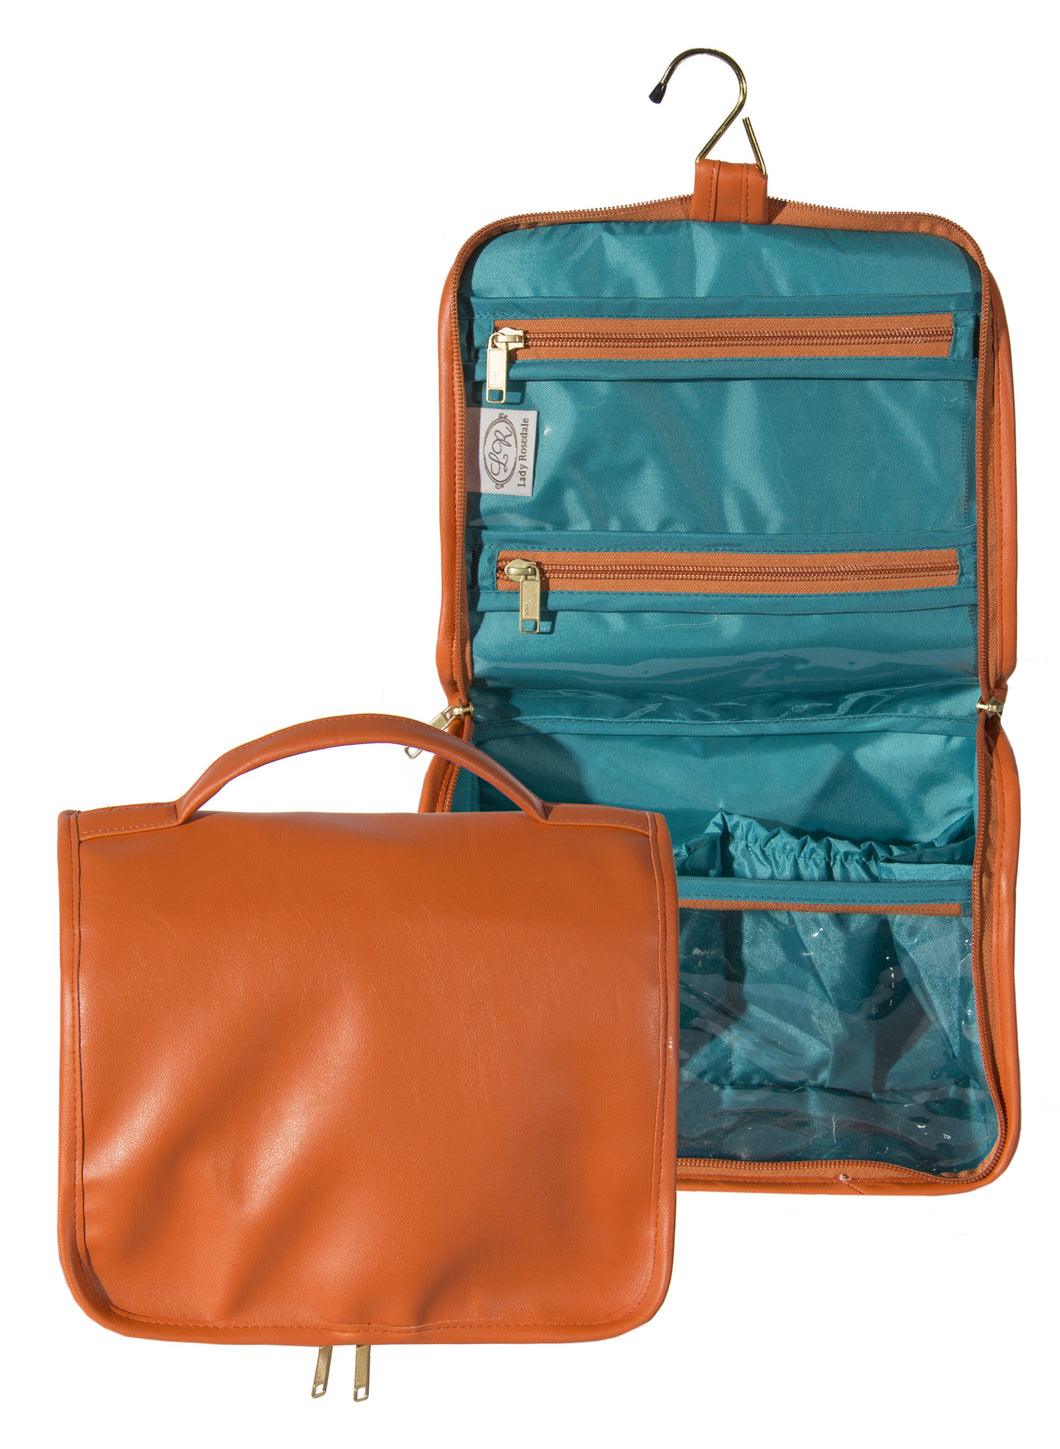 L789-3126 Ultimate Hangup Mandarin Orange, Comes with Hanger and double Zipper for easy travelling and to keep everything contained. Part of the Cosmetic and Travel Collection 10.5